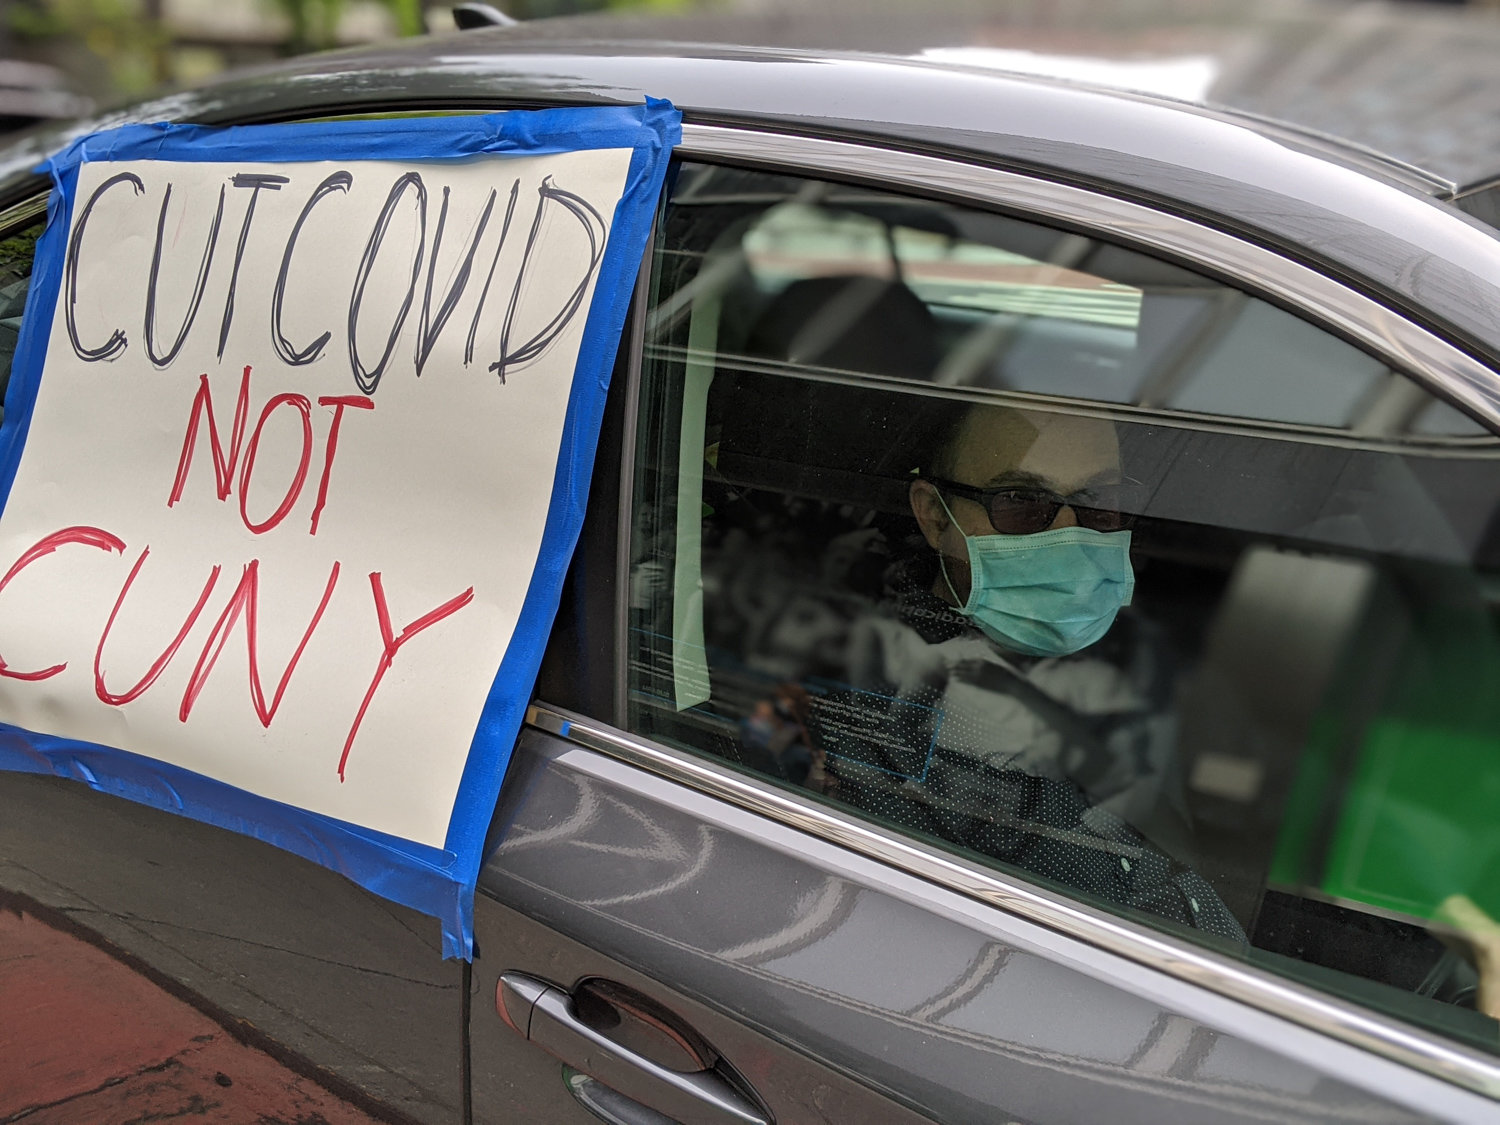 A sign that reads ‘cut COVID not CUNY’ is pasted on the window of a car during a protest organized by members of CUNY’s Professional Staff Congress. It was all in response to layoffs across the public university system — a consequence of the coronavirus pandemic.